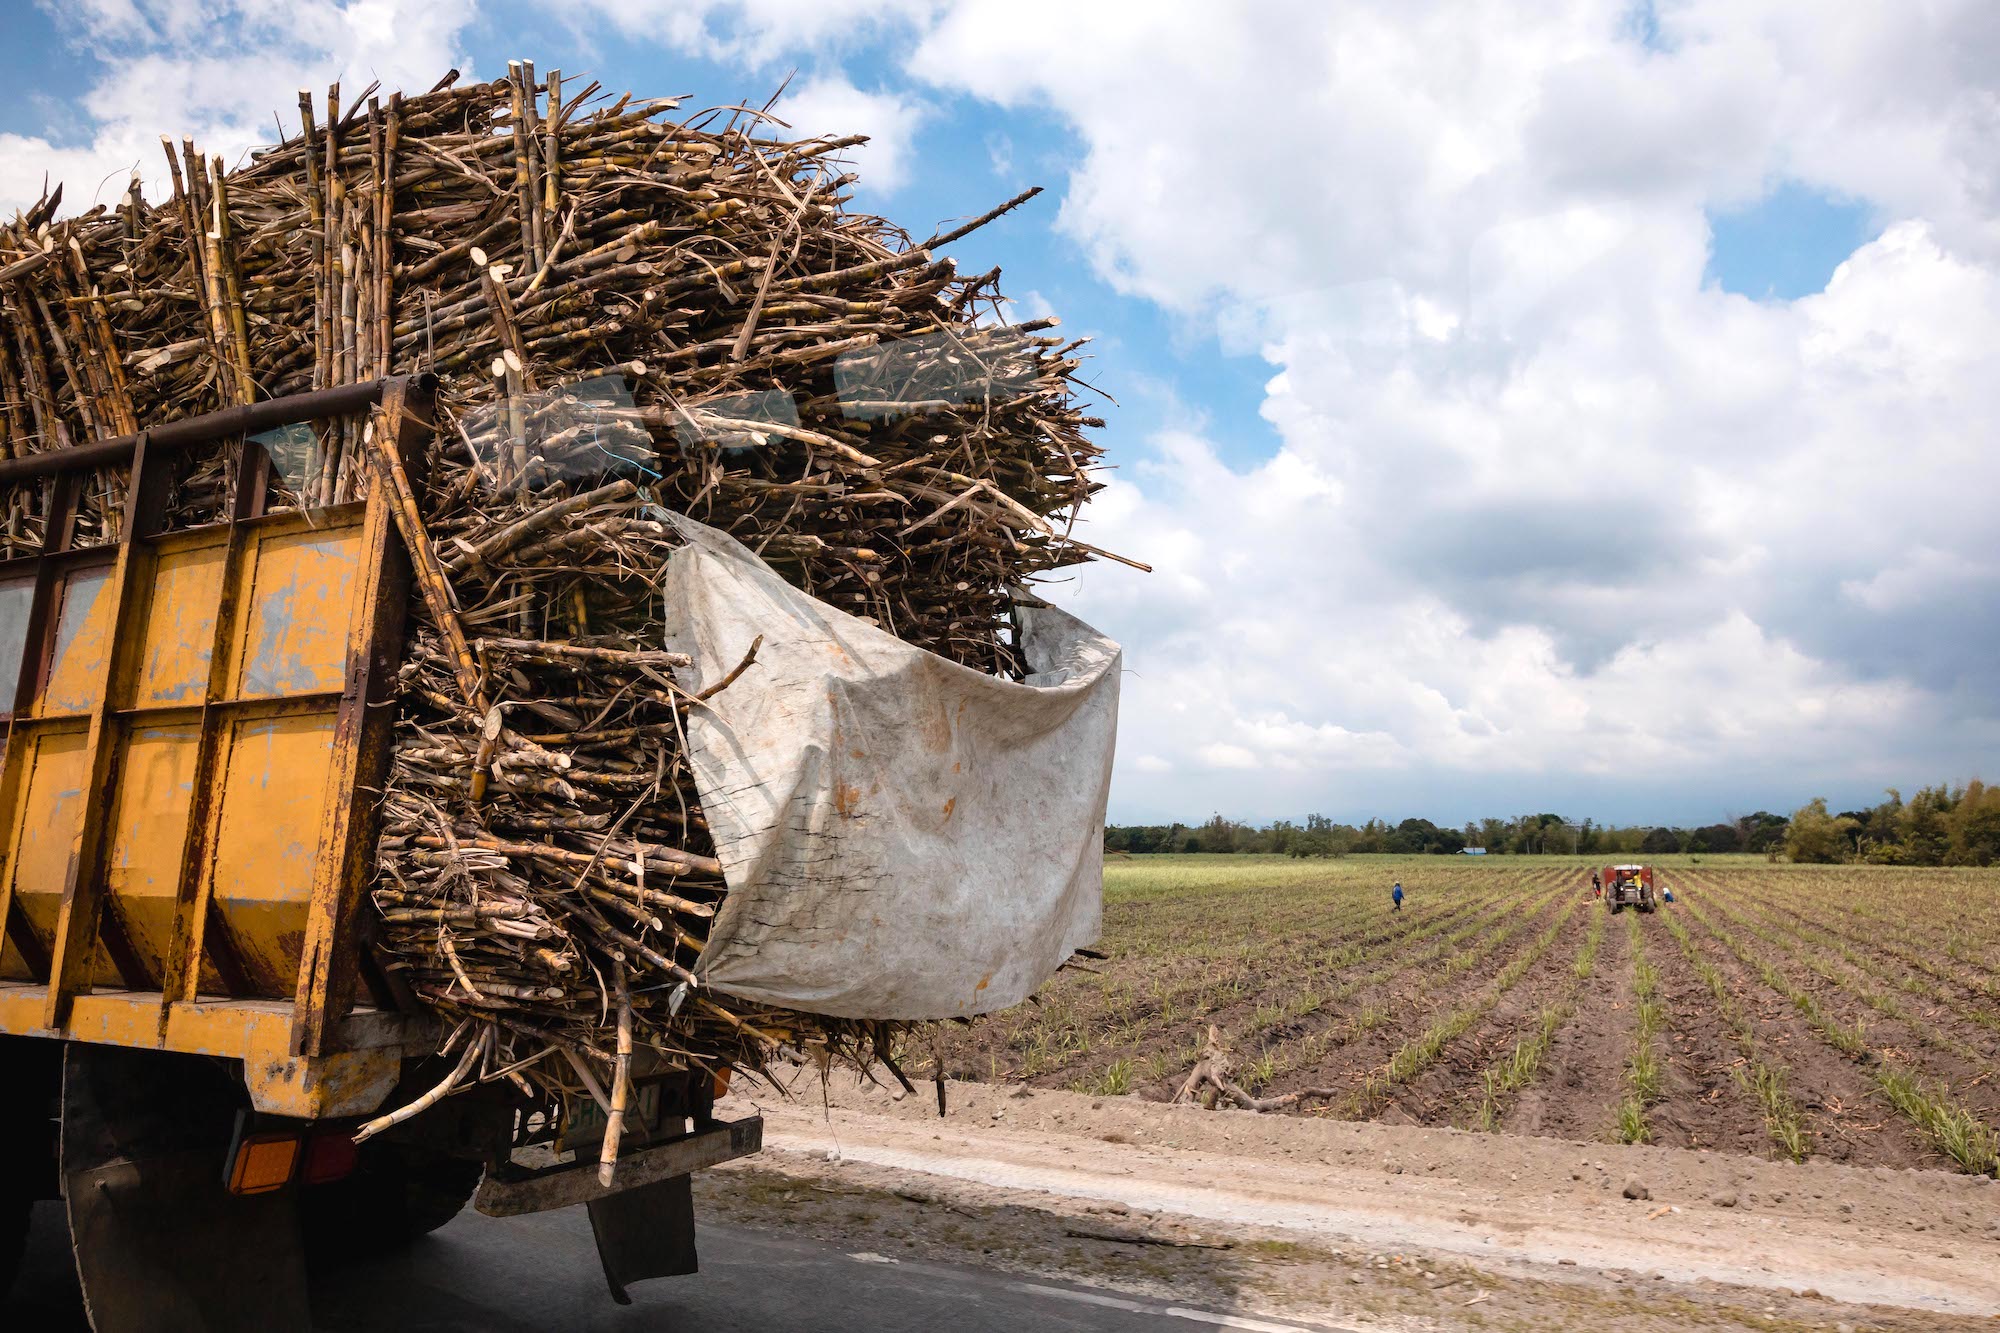 Hauling a truckload of sugar canes from the field to the mill